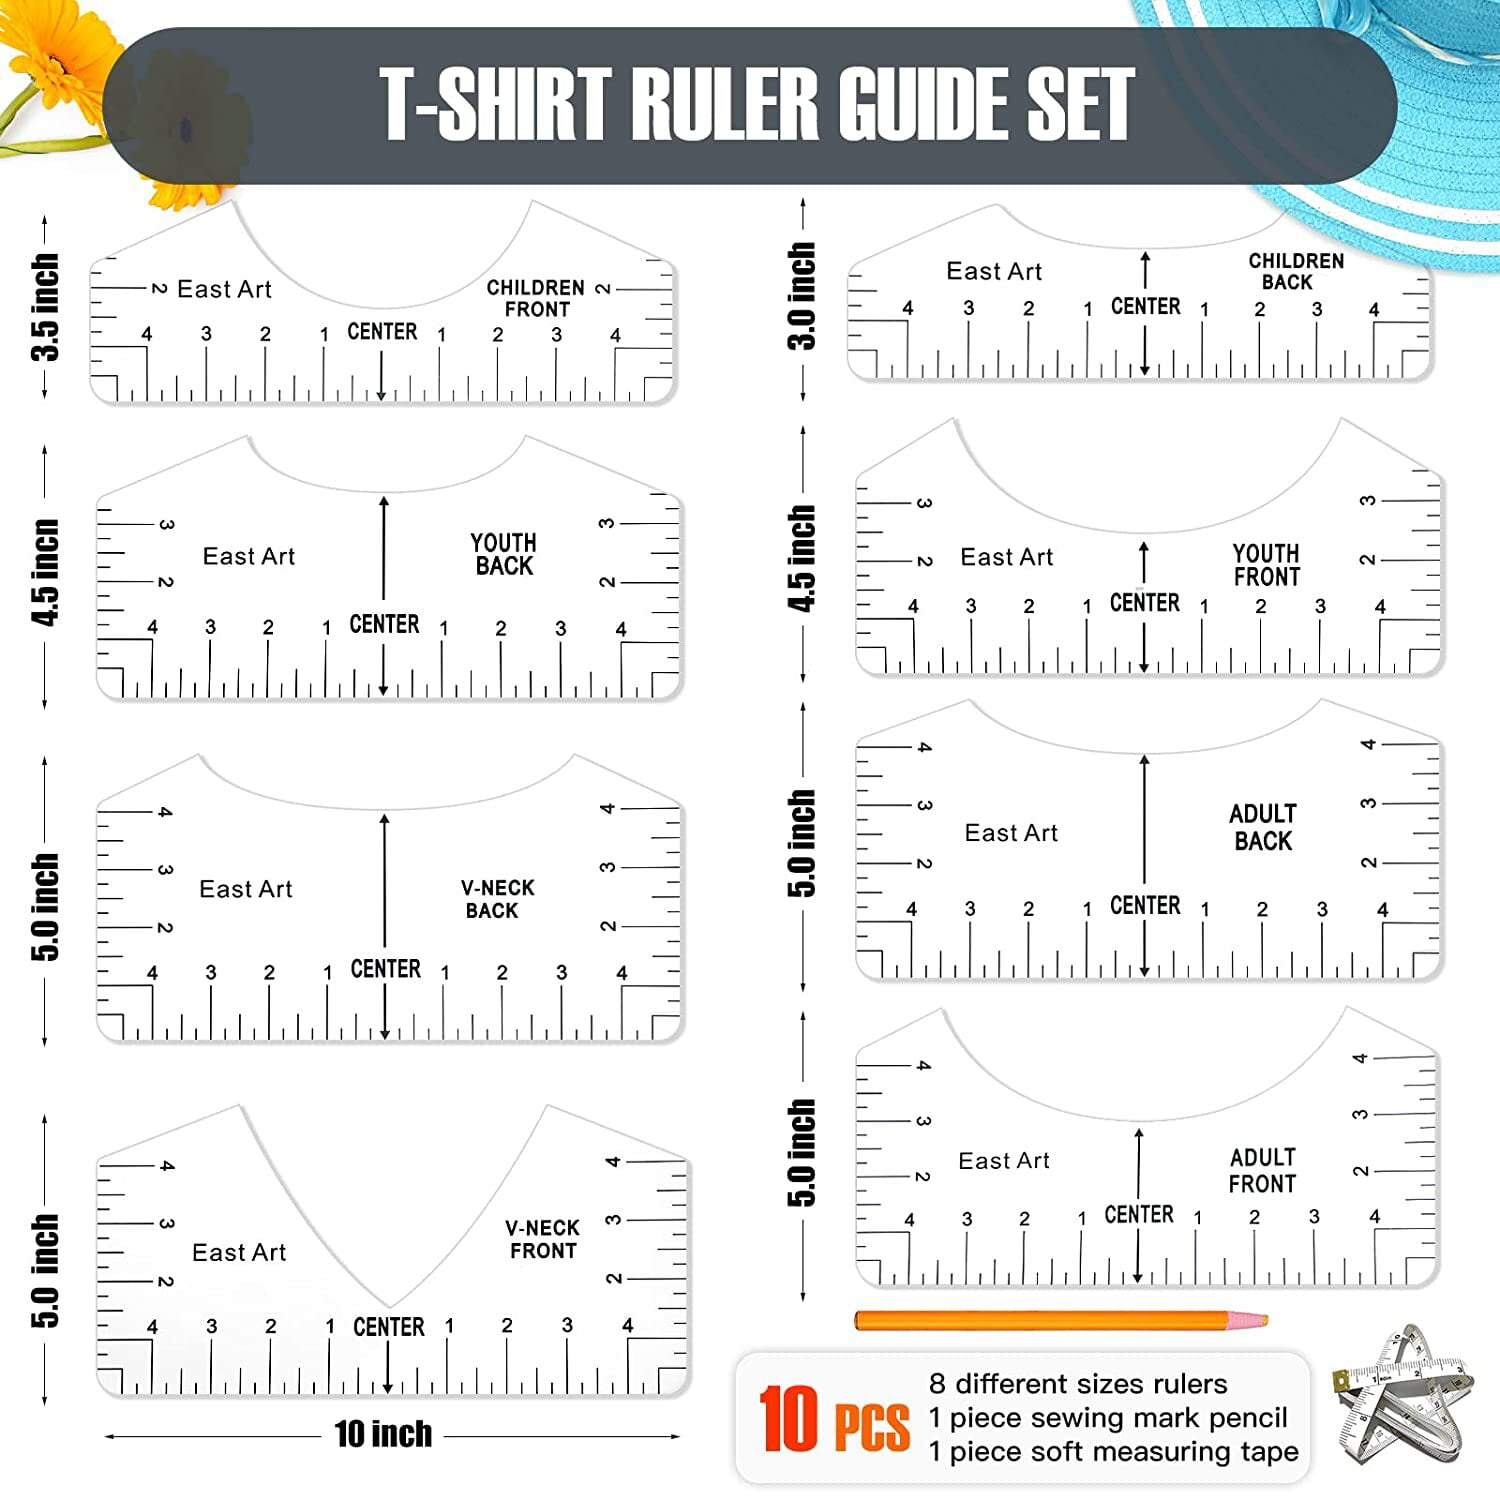 Tshirt Ruler Guide for Alignment, TShirt Rulers to Center Designs,  Alignment Tool with Soft Tape Measure,Pencil